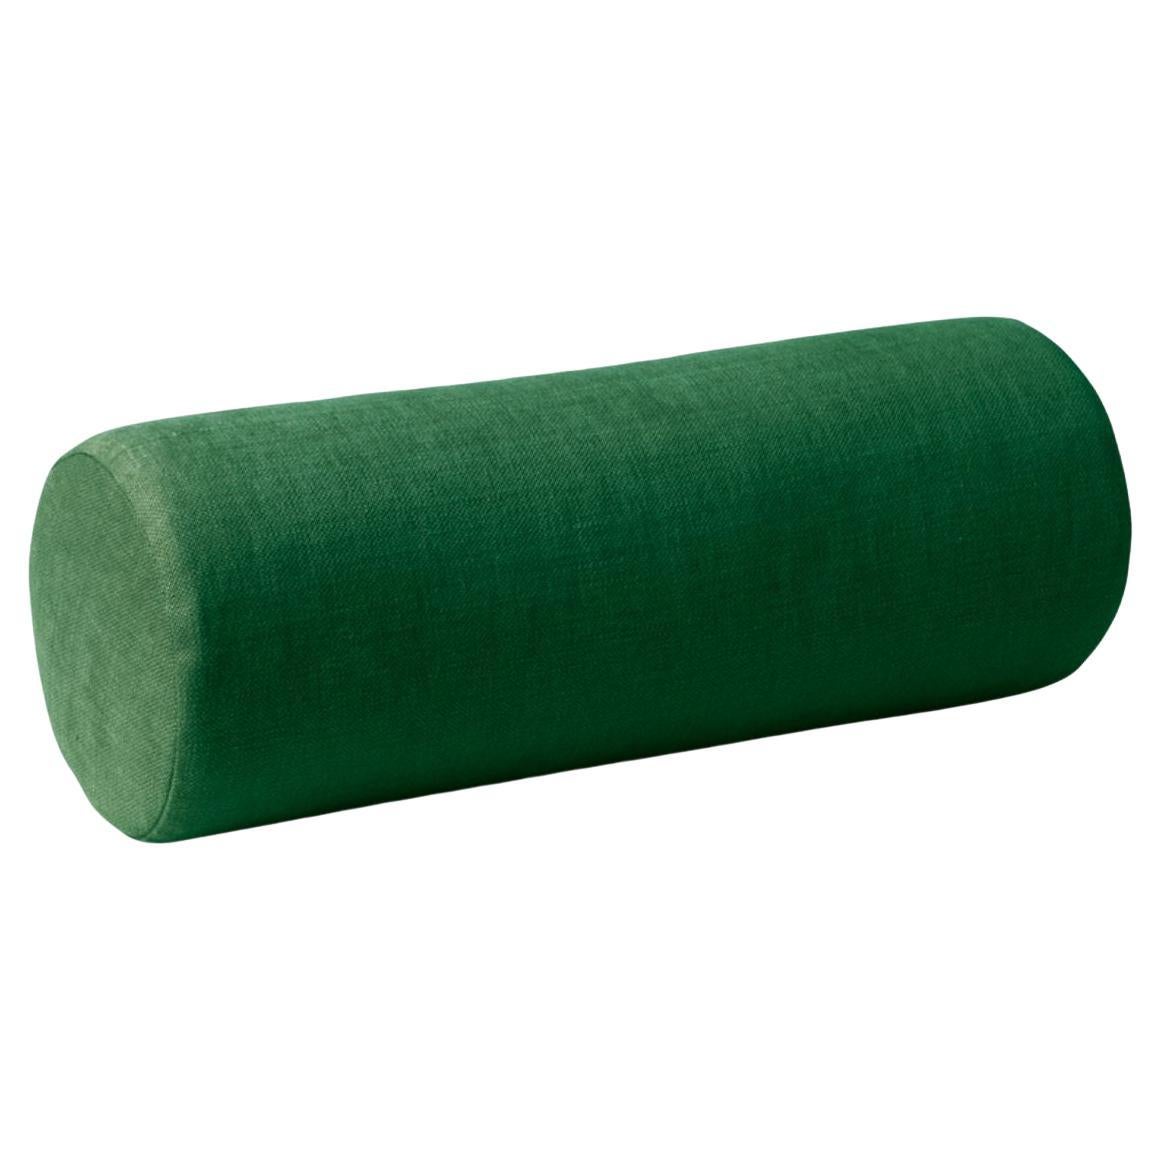 Galore Cushion Emerald by Warm Nordic For Sale